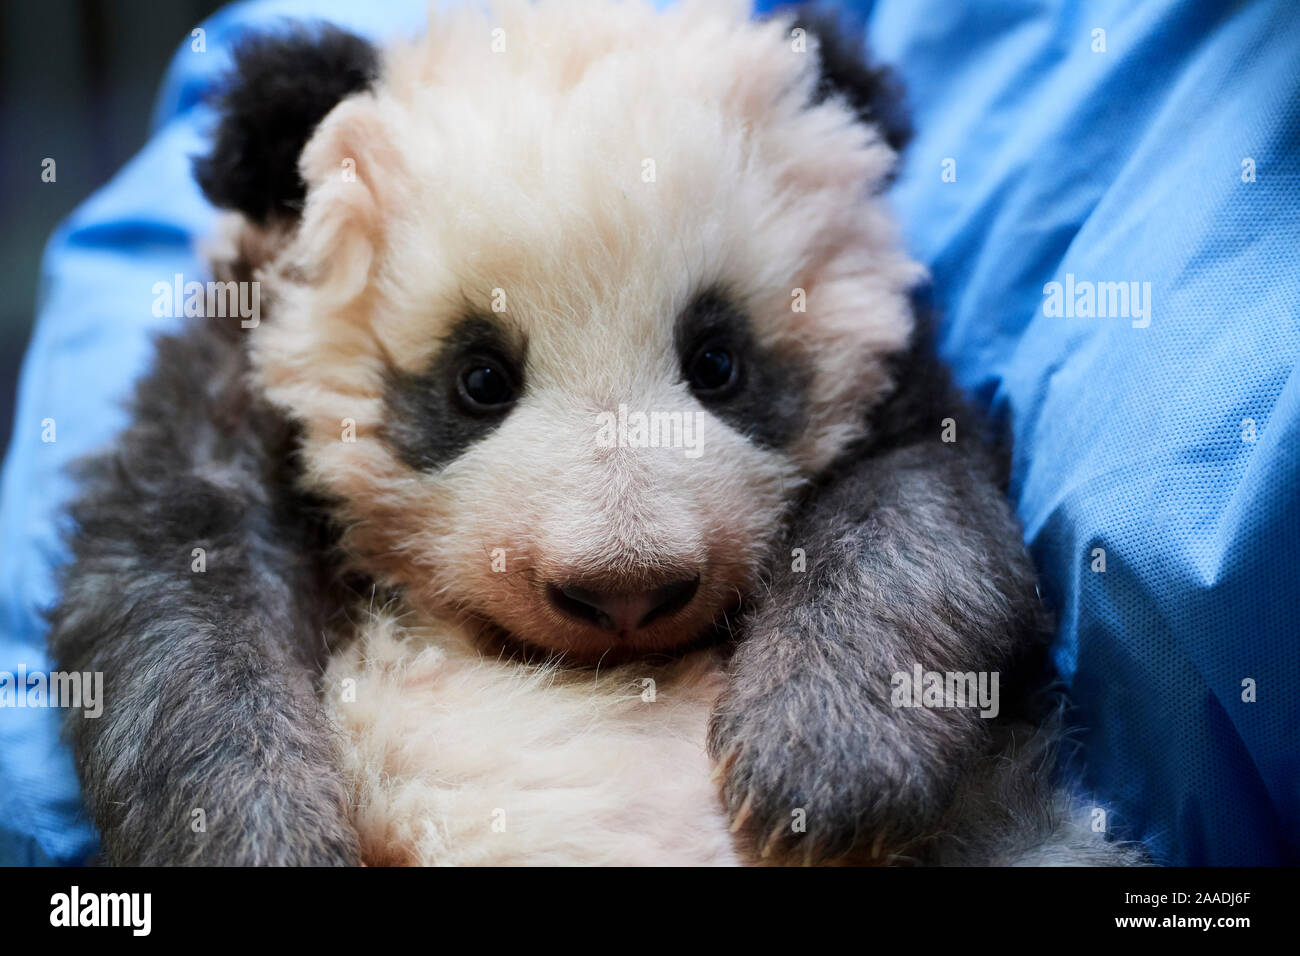 Giant panda baby (Ailuropoda melanoleuca) Mini Xuan-Zi, age 3 months, in arms of keeper, Beauval Zoo, France, October 2017. Stock Photo